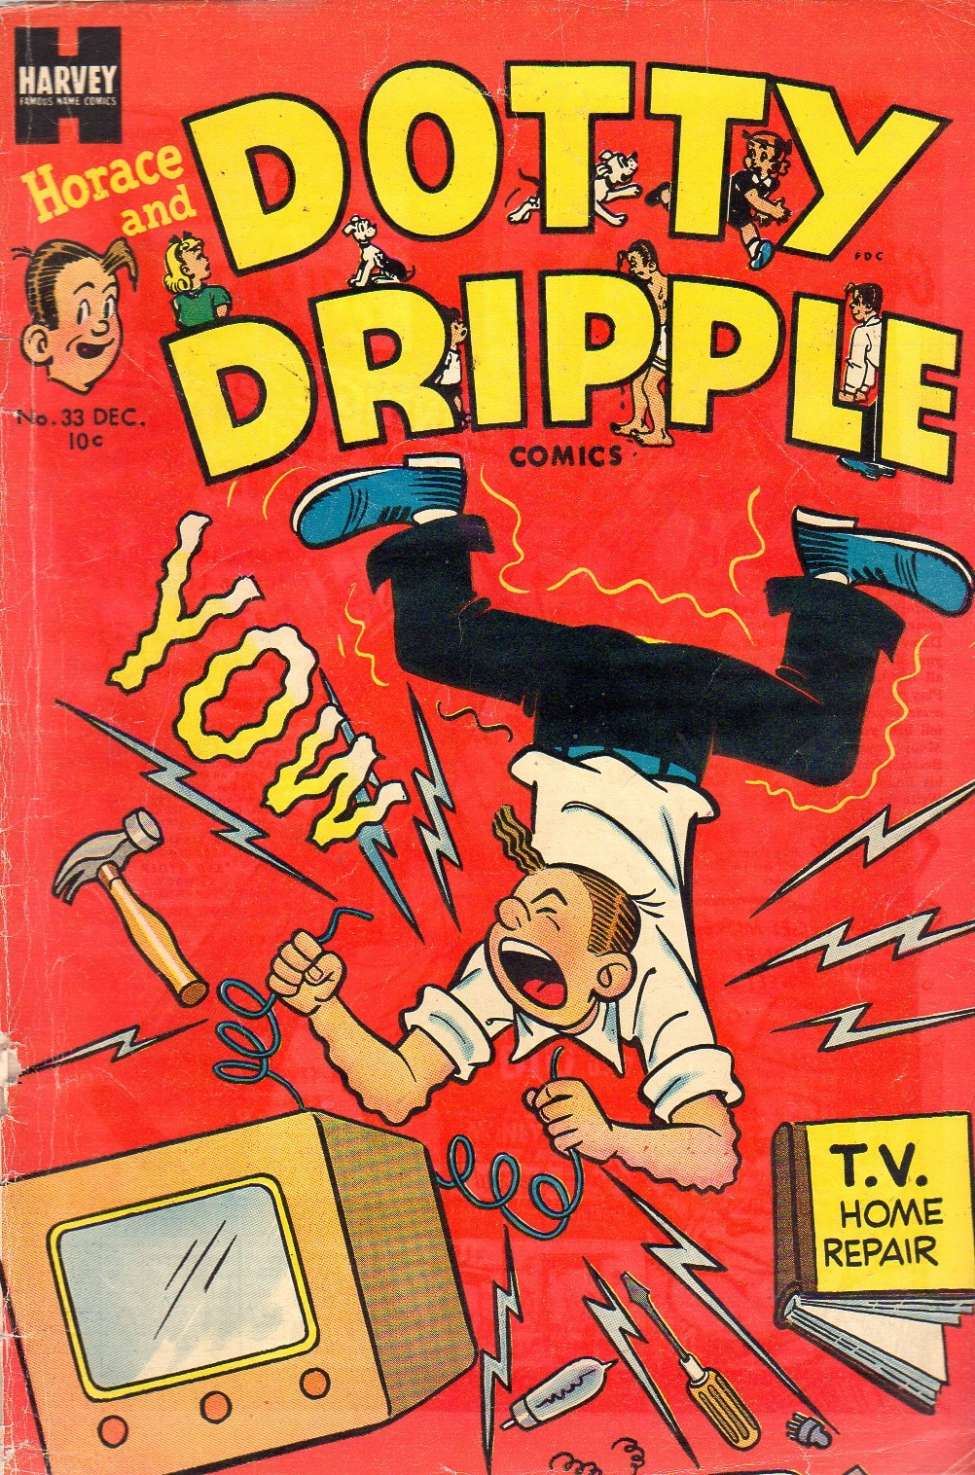 Book Cover For Horace & Dotty Dripple 33